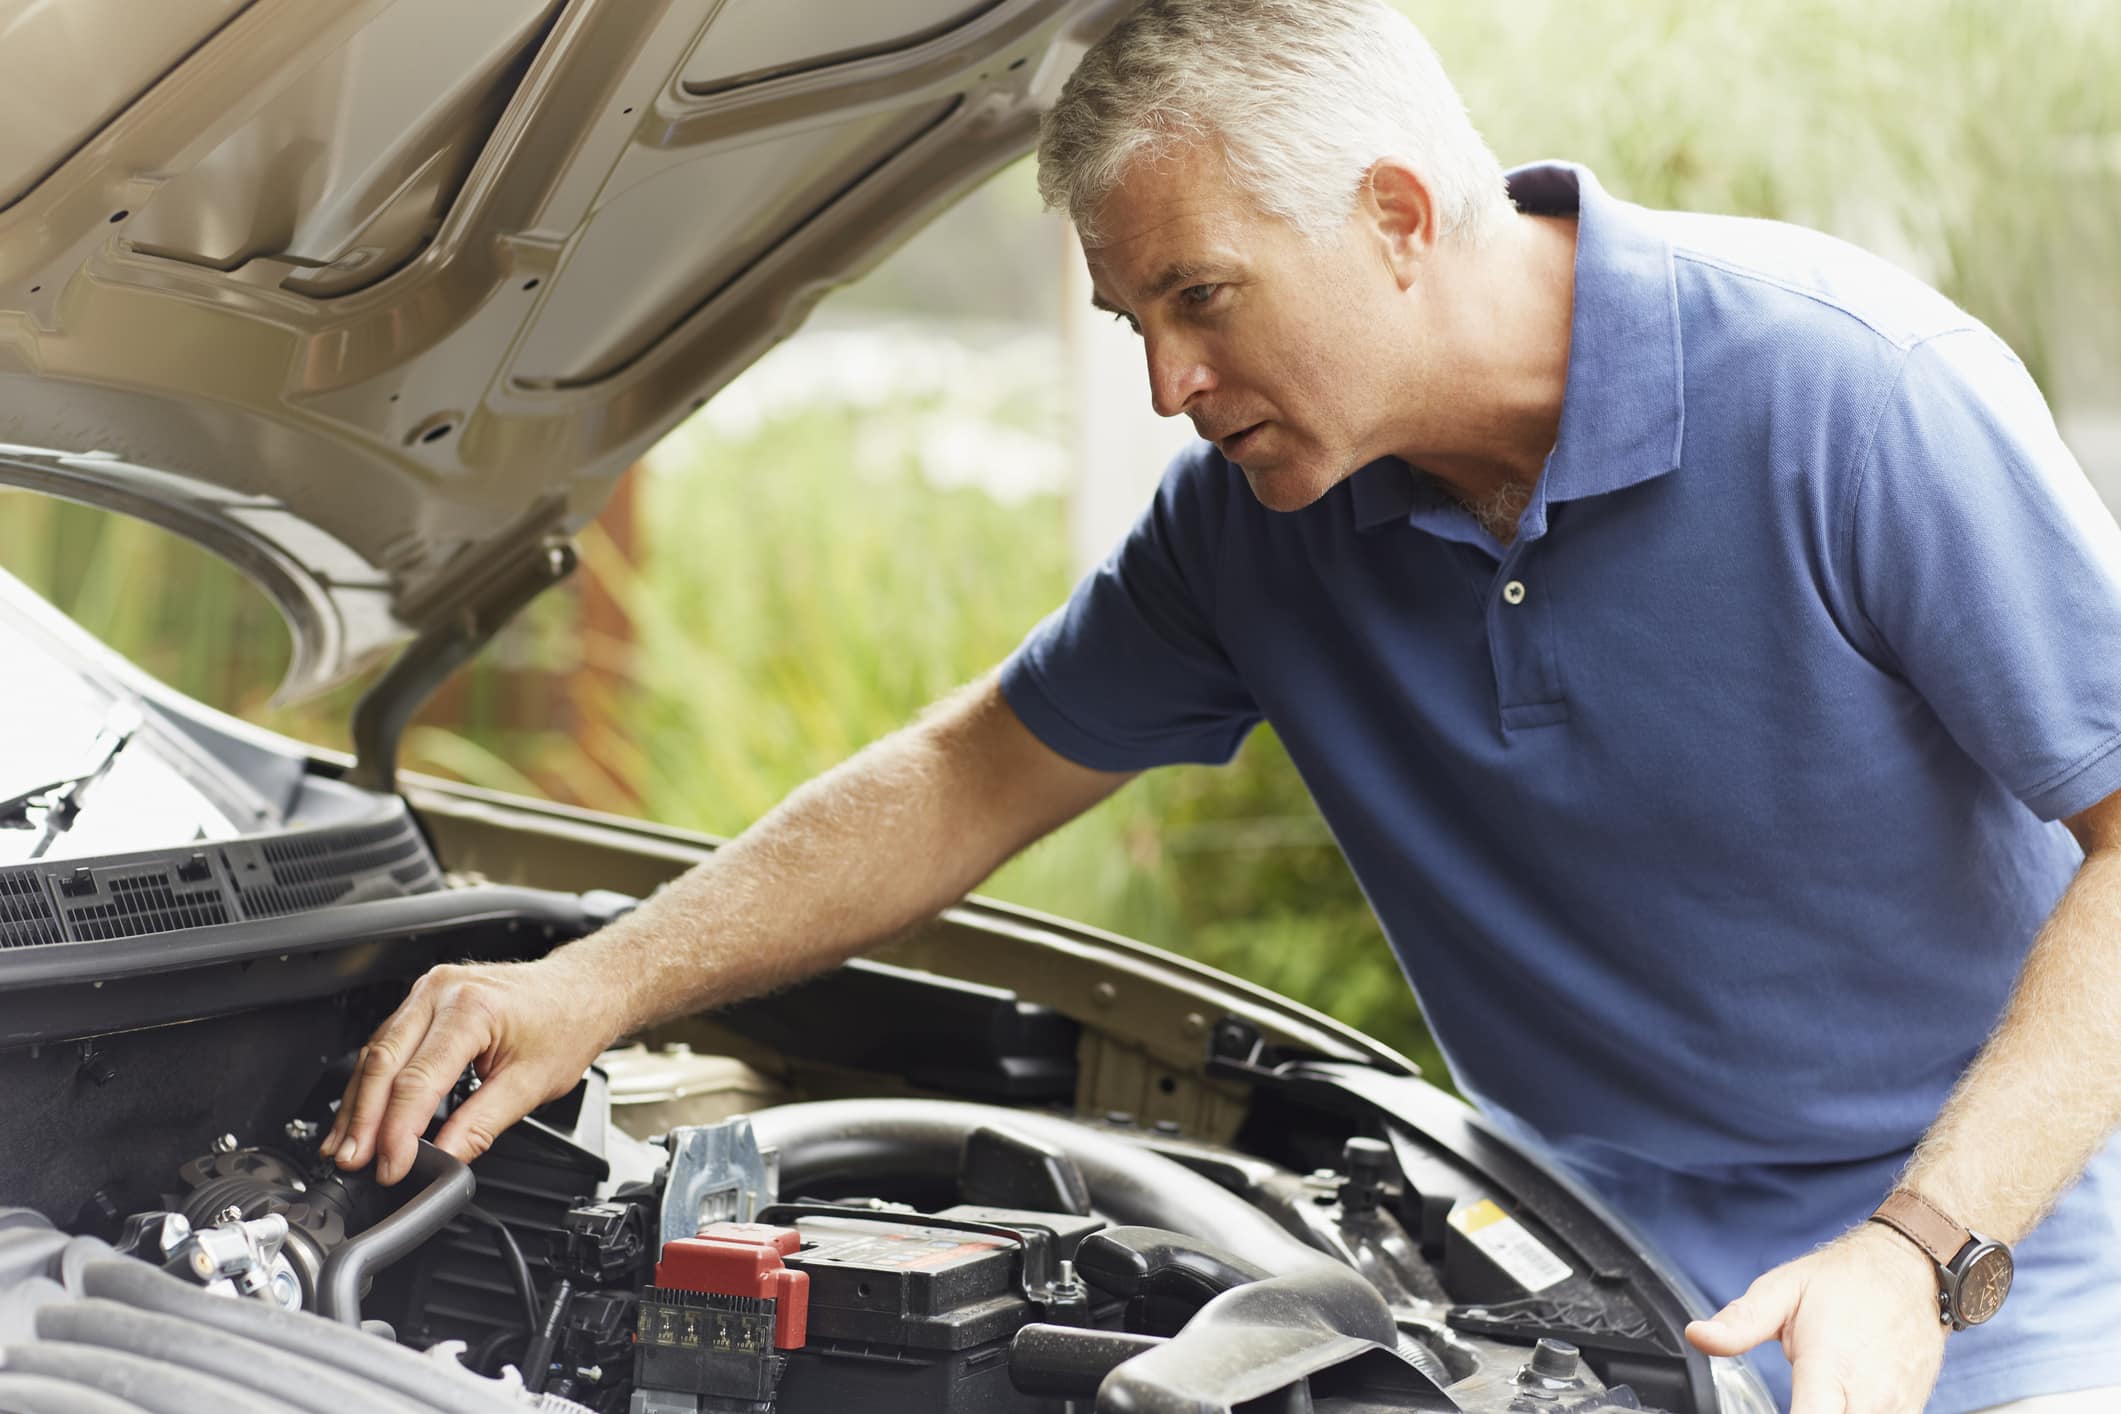 THE SOLUTION TO COMMON CAR PROBLEMS DAYTON AUTO REPAIR